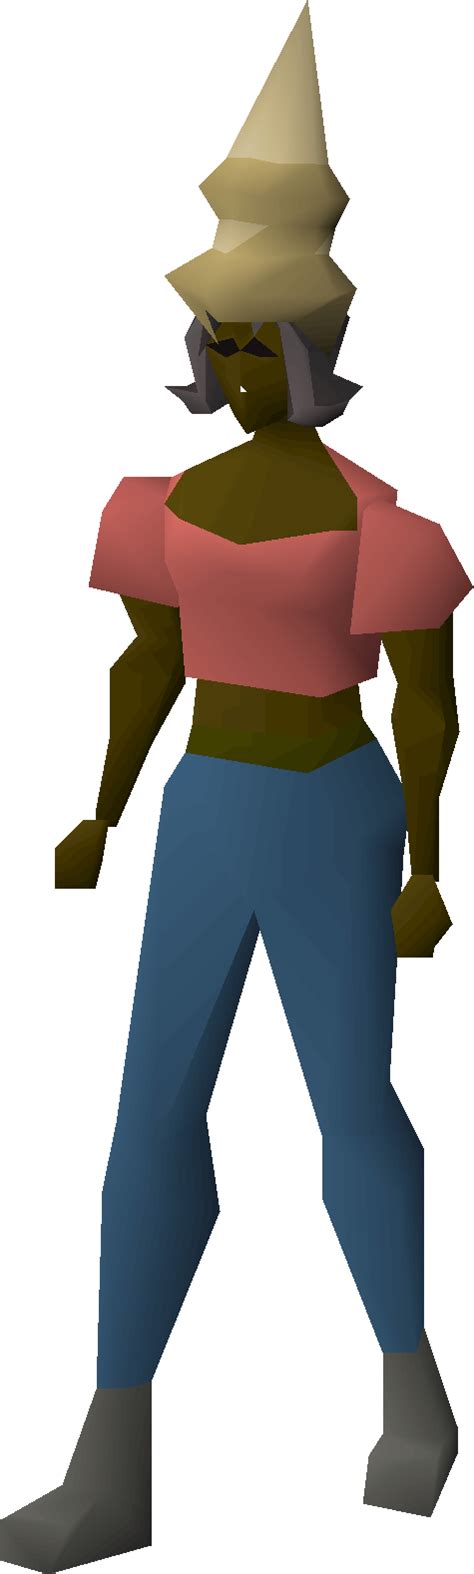 Filemyre Snelm Pointed Equipped Femalepng Osrs Wiki